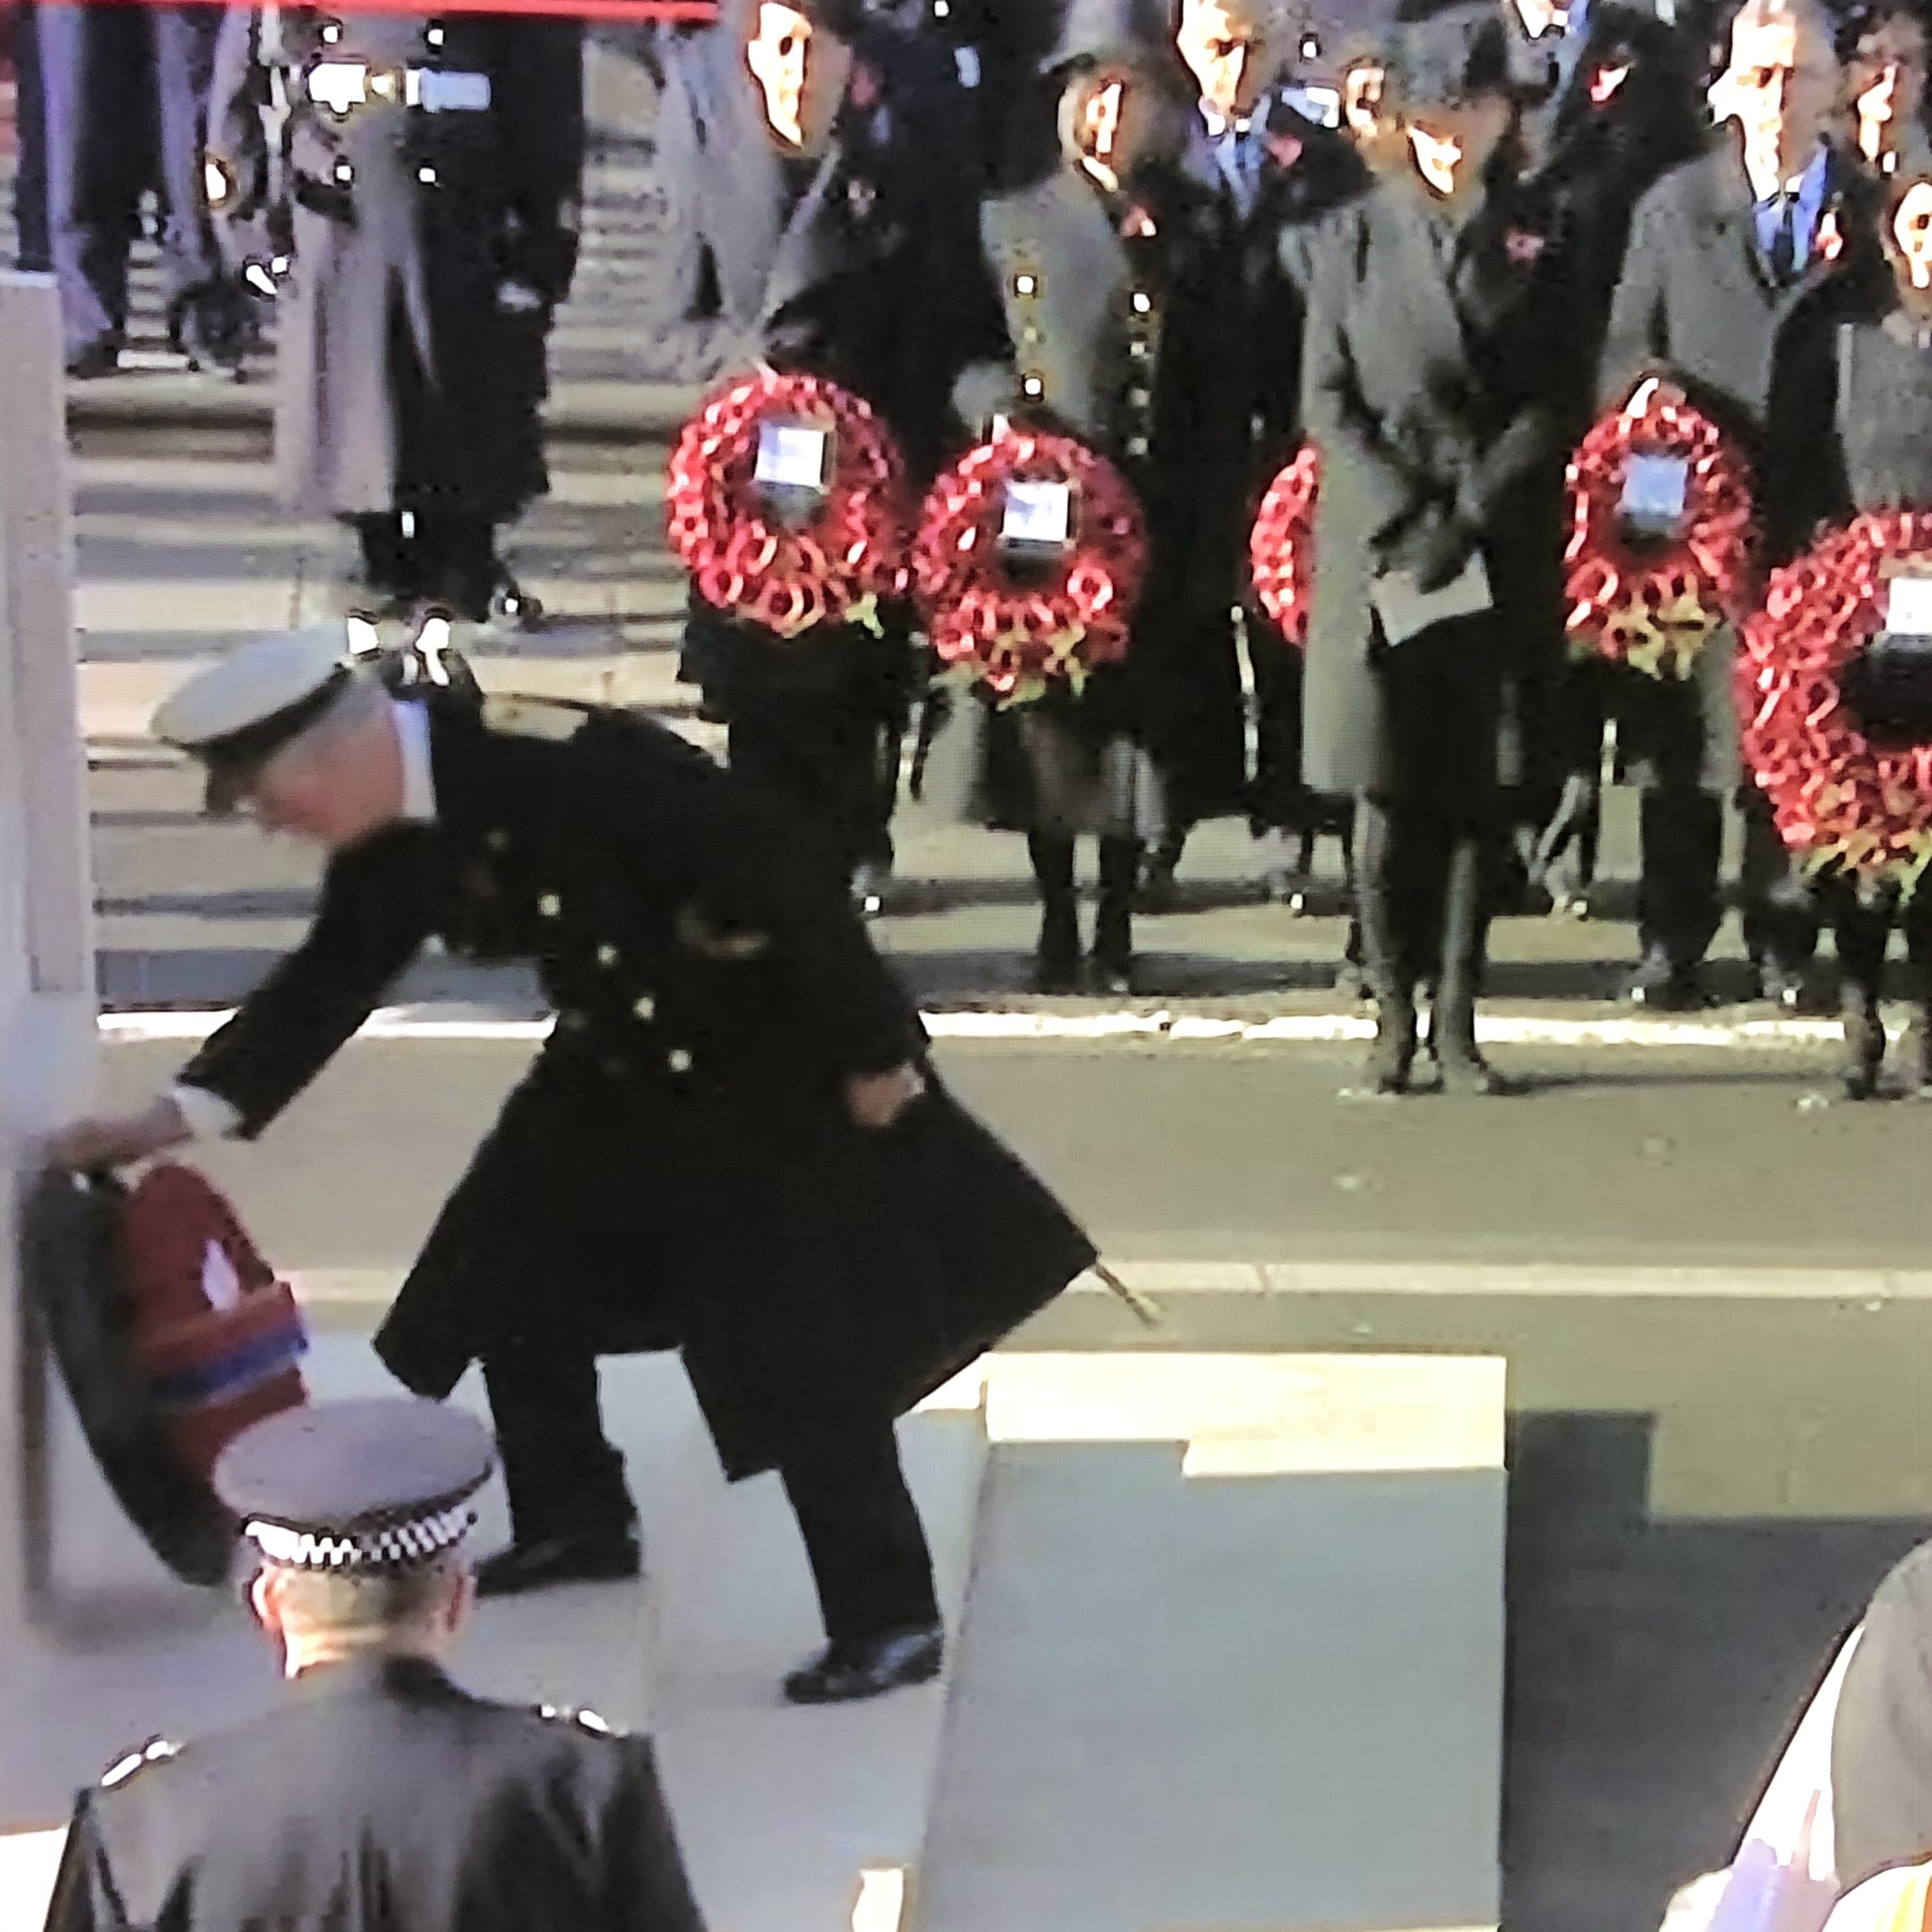 HRH Prince Charles laying a wreath on behalf of the Queen